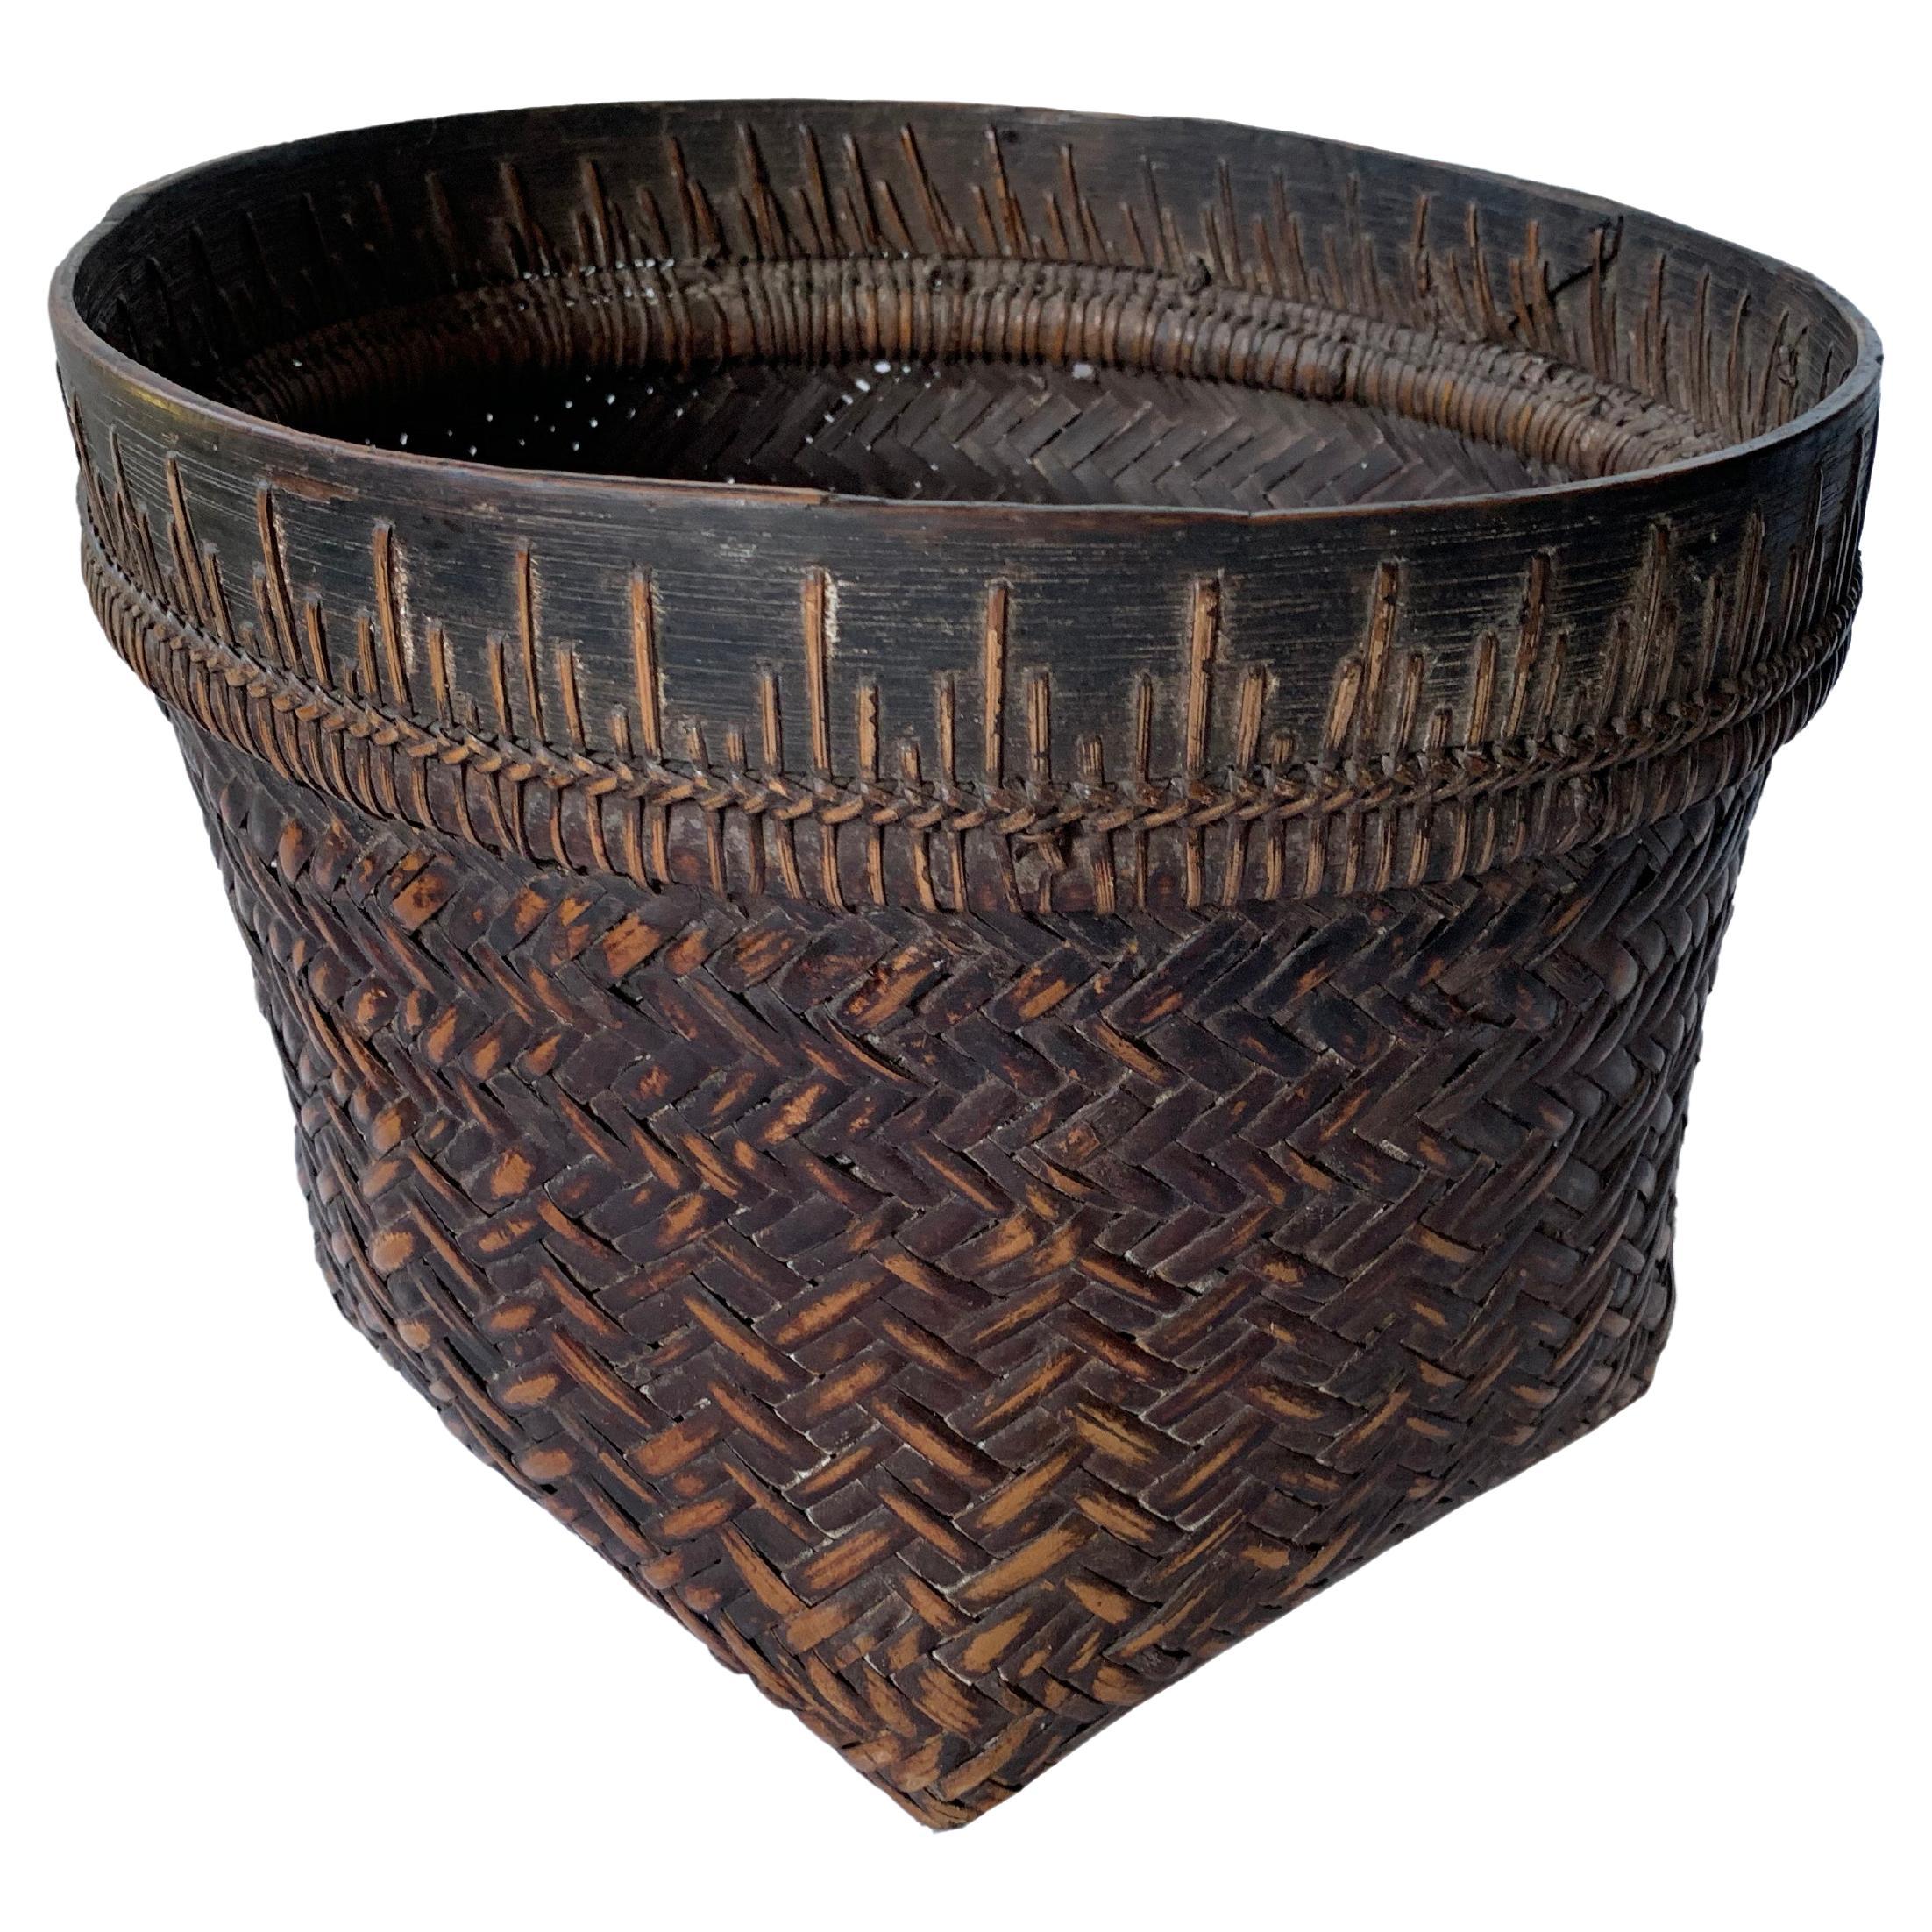 Rattan Basket Dayak Tribe Hand-Woven from Kalimantan, Borneo, Mid 20th Century For Sale